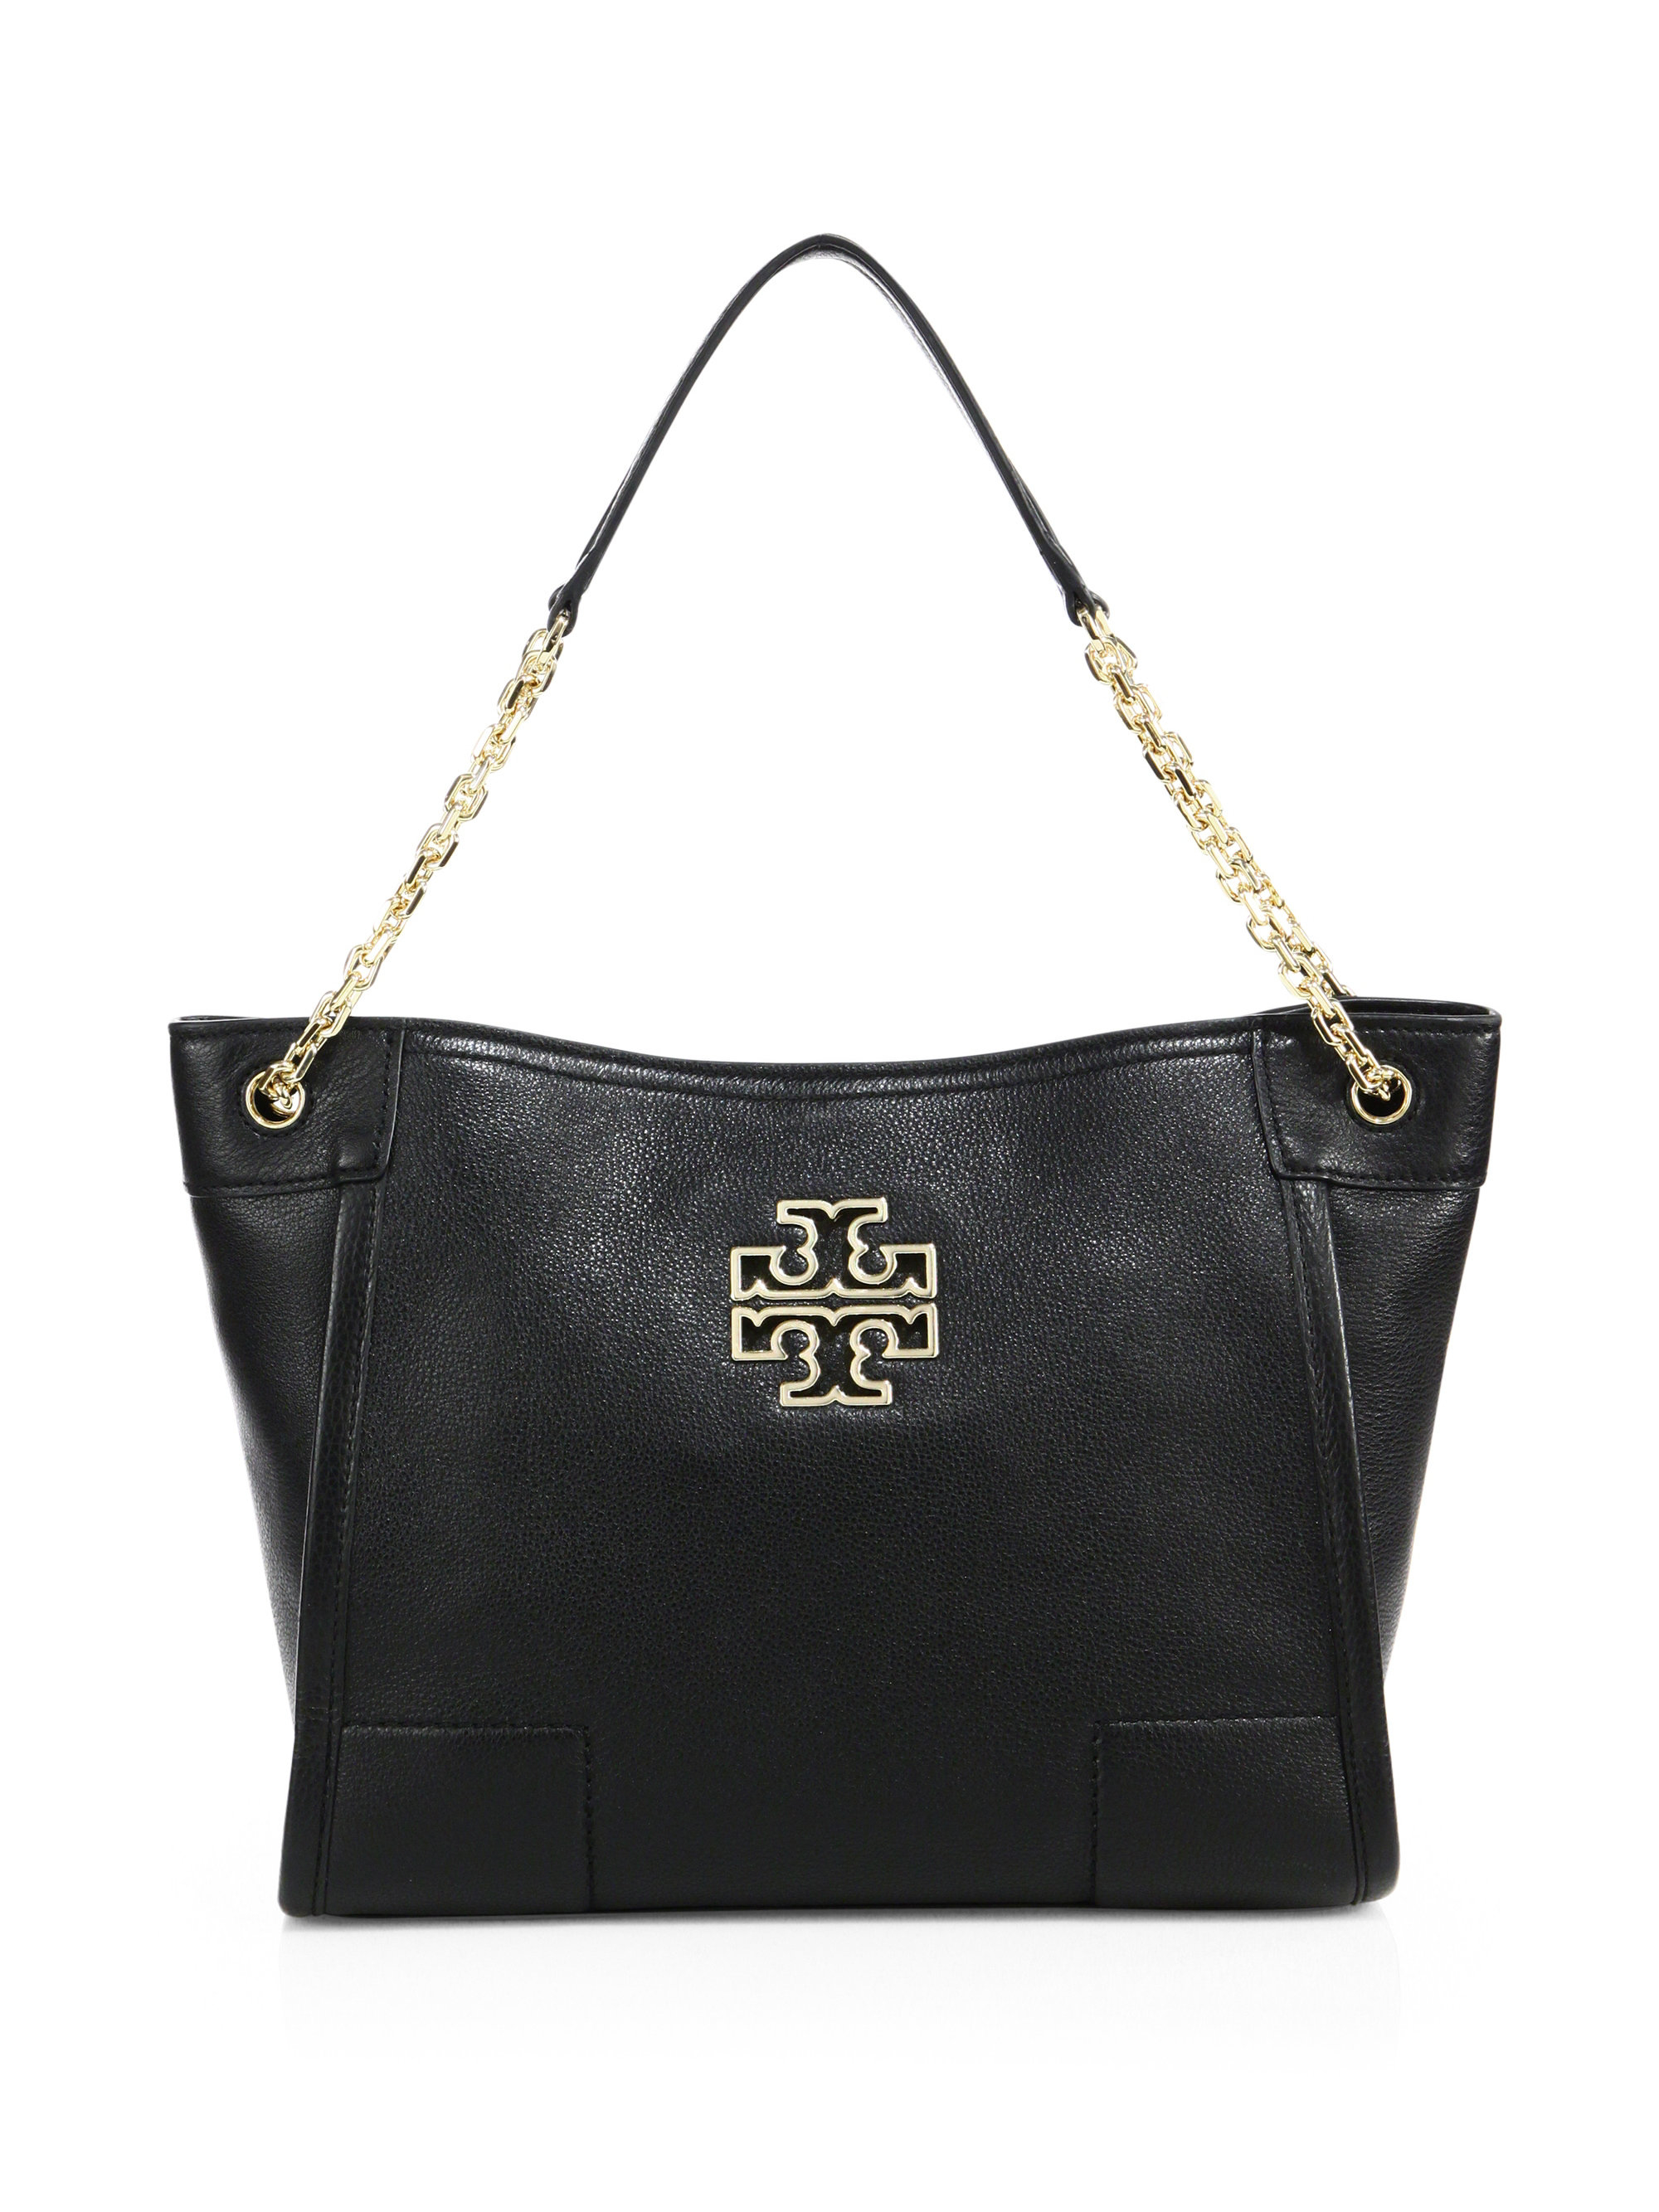 Lyst - Tory Burch Britten Small Center-zip Leather Tote in Black